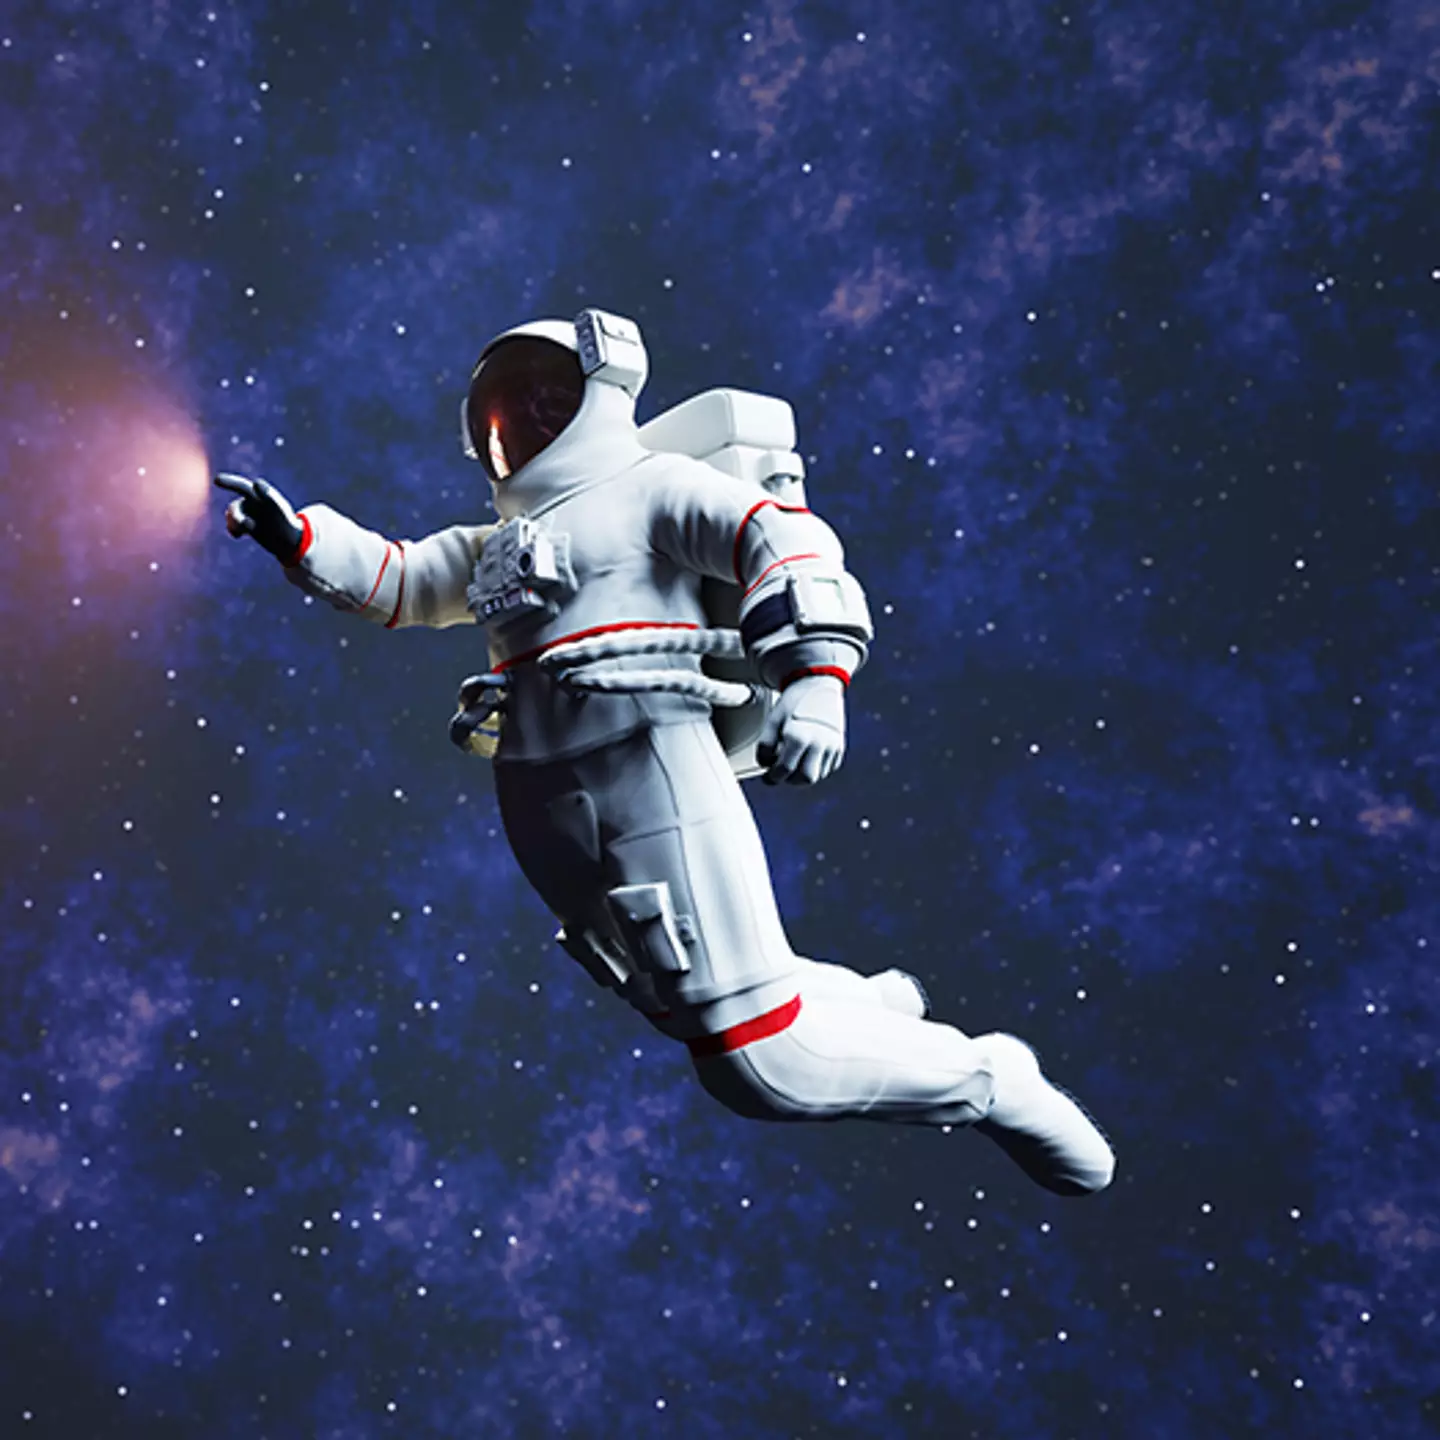 Creepy video shows how long humans could survive in space without a spacesuit